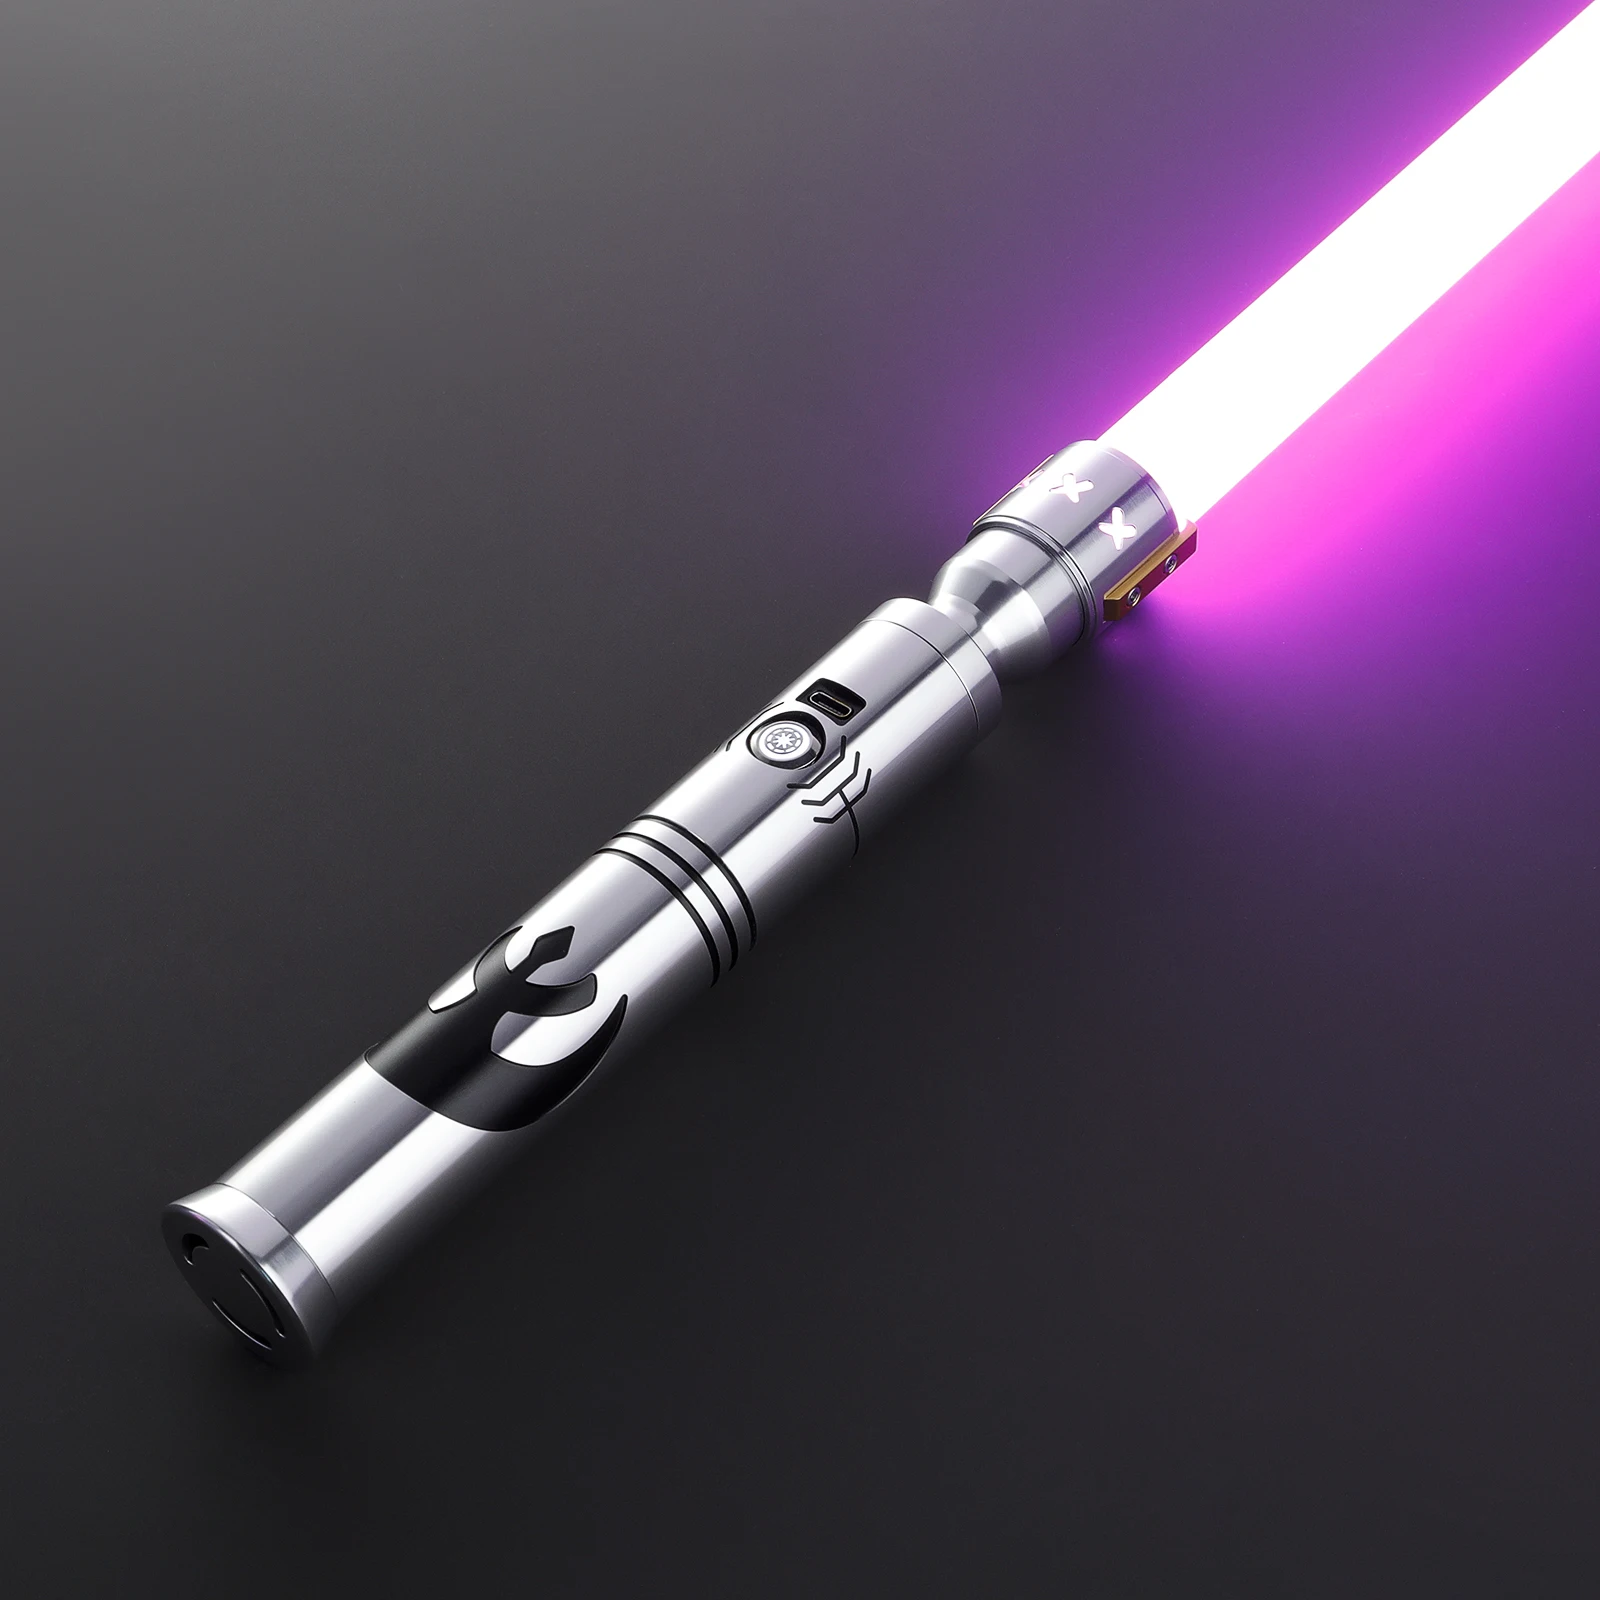 

DamienSaber Heavy Dueling Lightsaber Sensitive Smooth Swing Bluetooth Light Sabers Metal Hilt Motion Control with 34 Sound Fonts